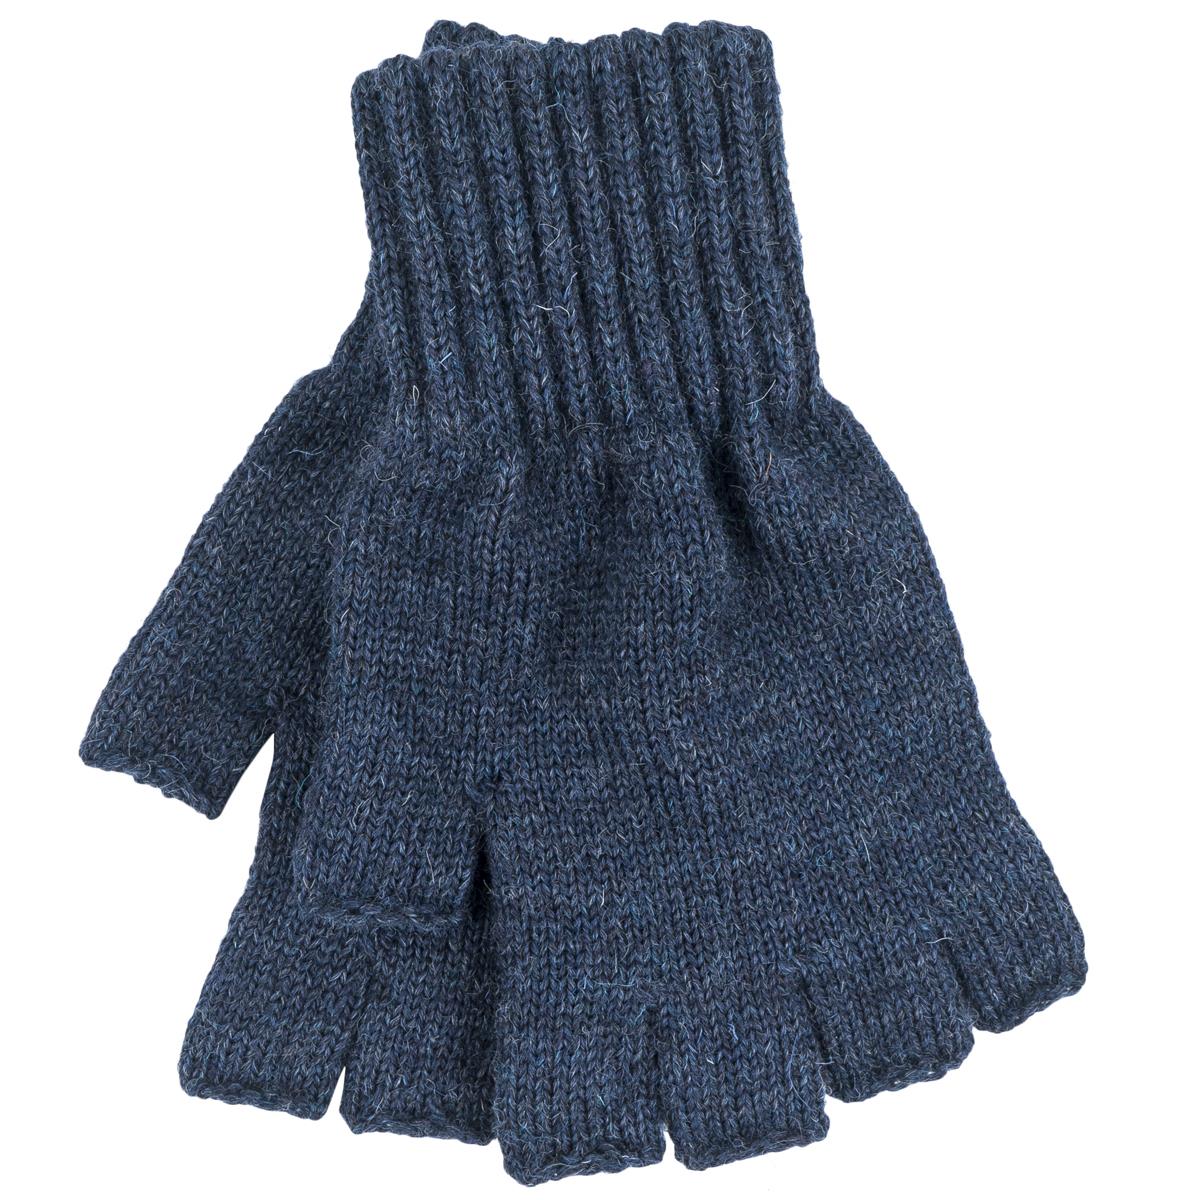 What are the Barbour Fingerless Gloves made from?